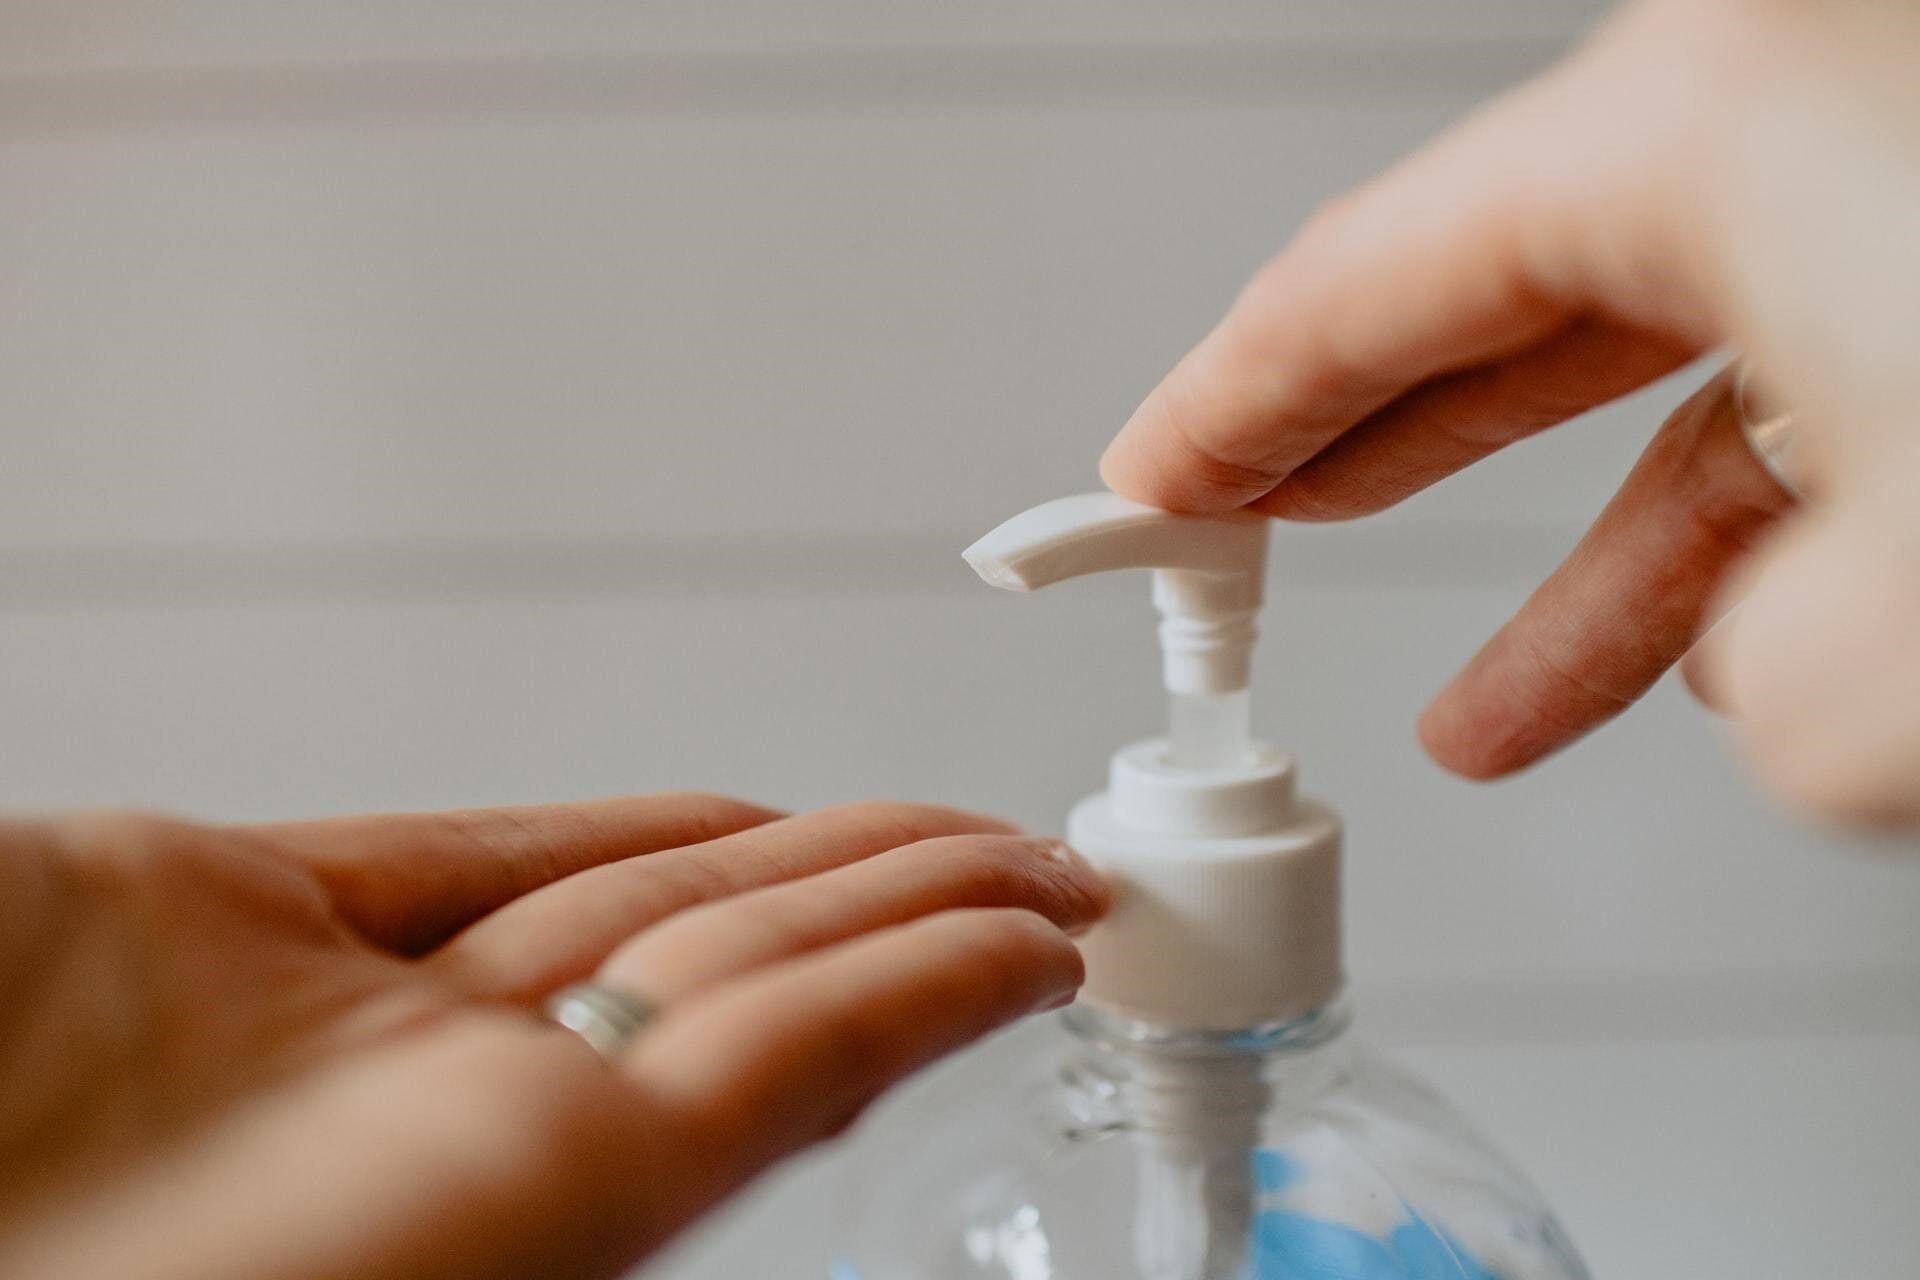 7 things to know about hand sanitizer gel